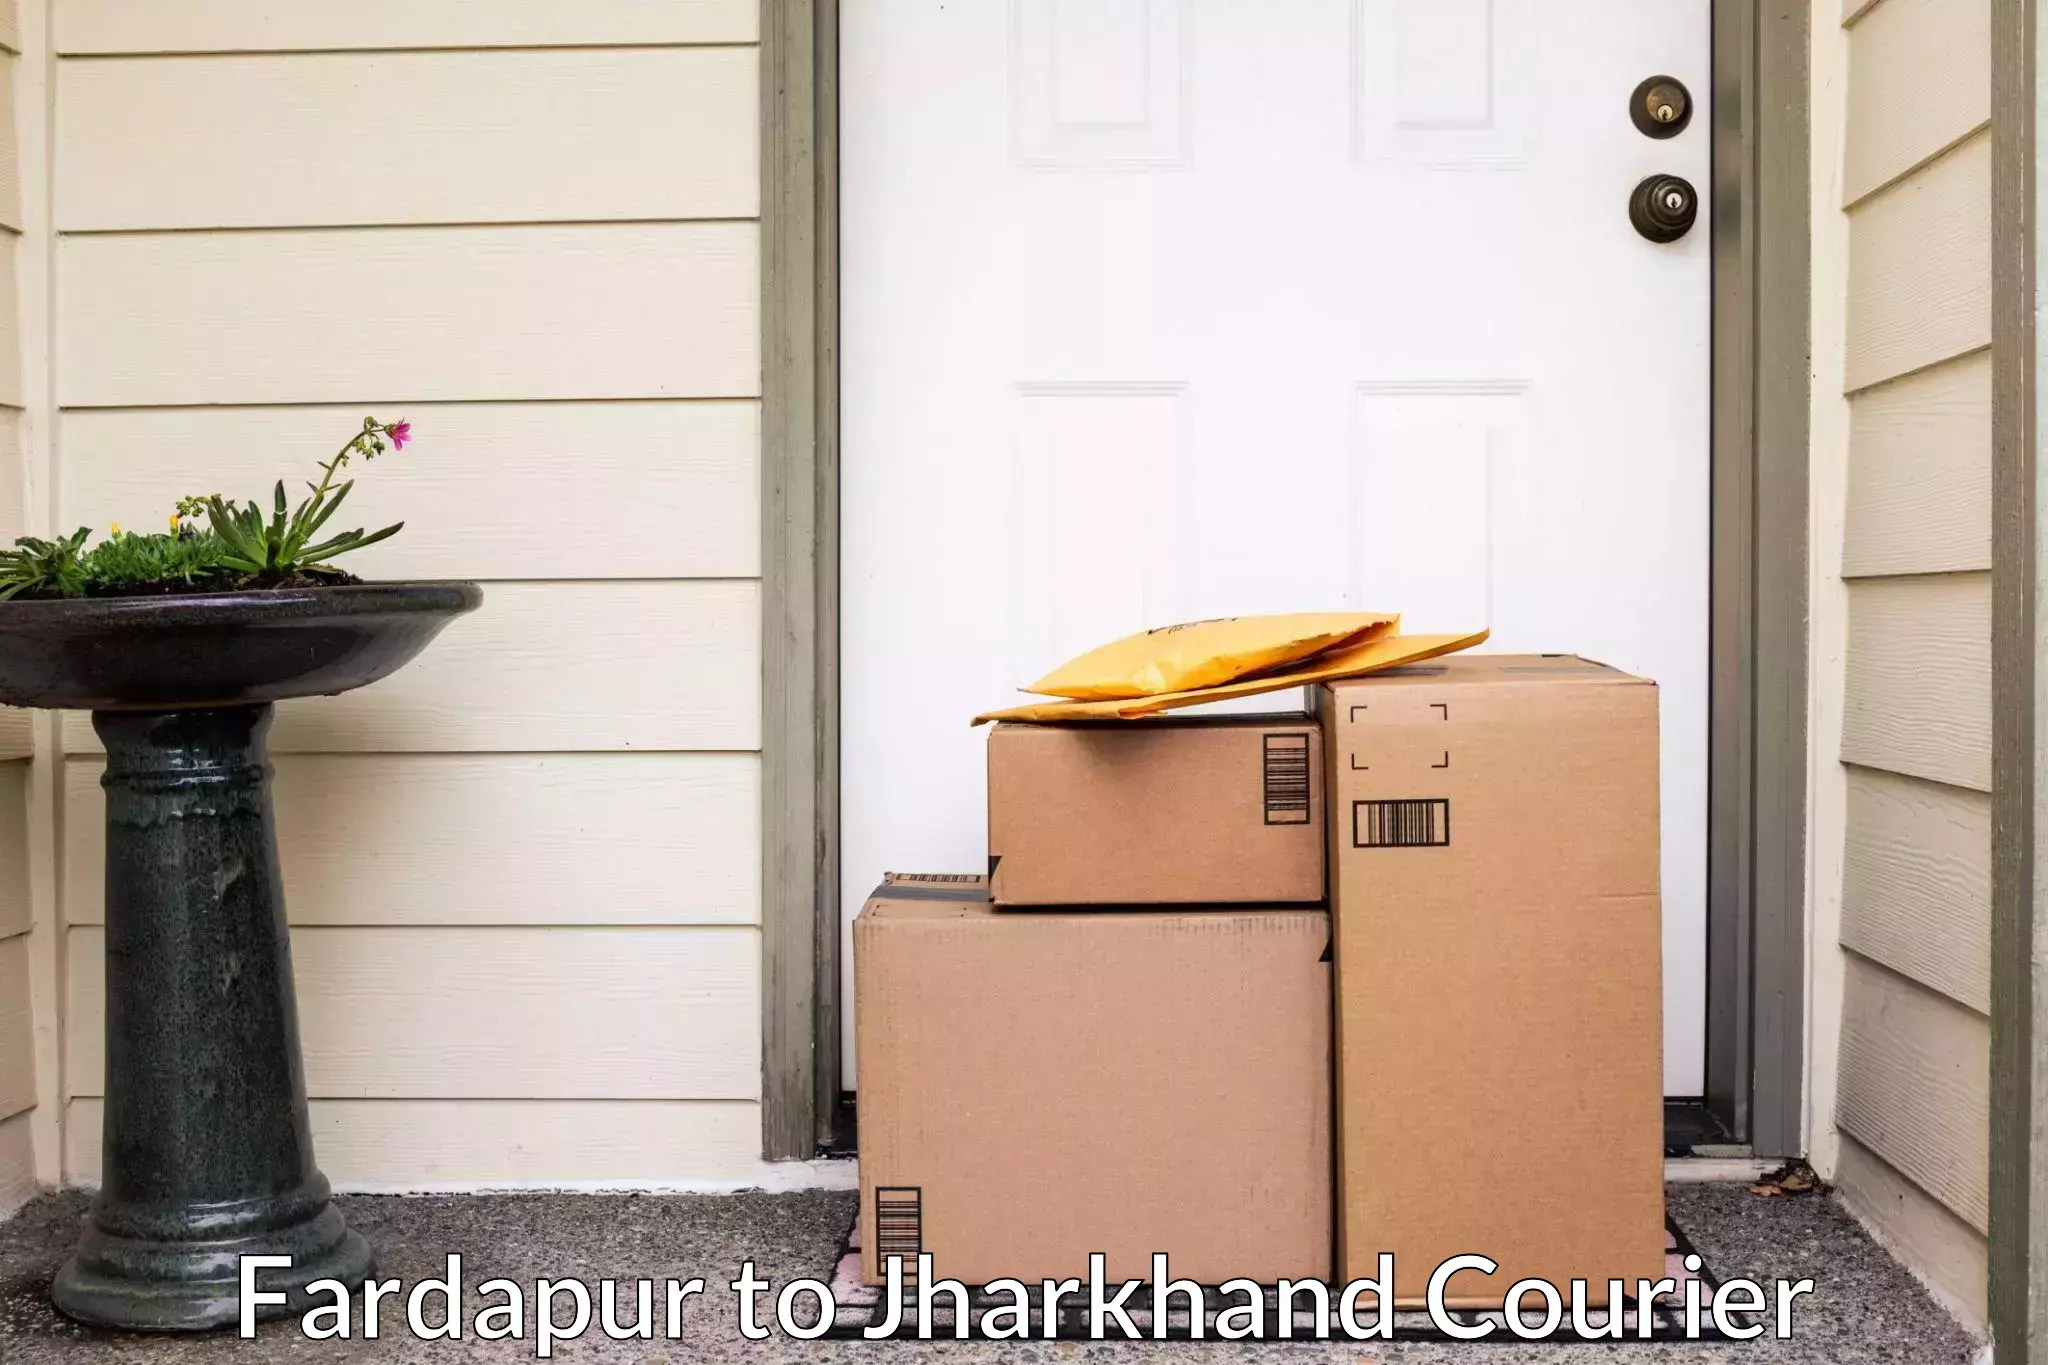 Furniture delivery service Fardapur to Jharkhand